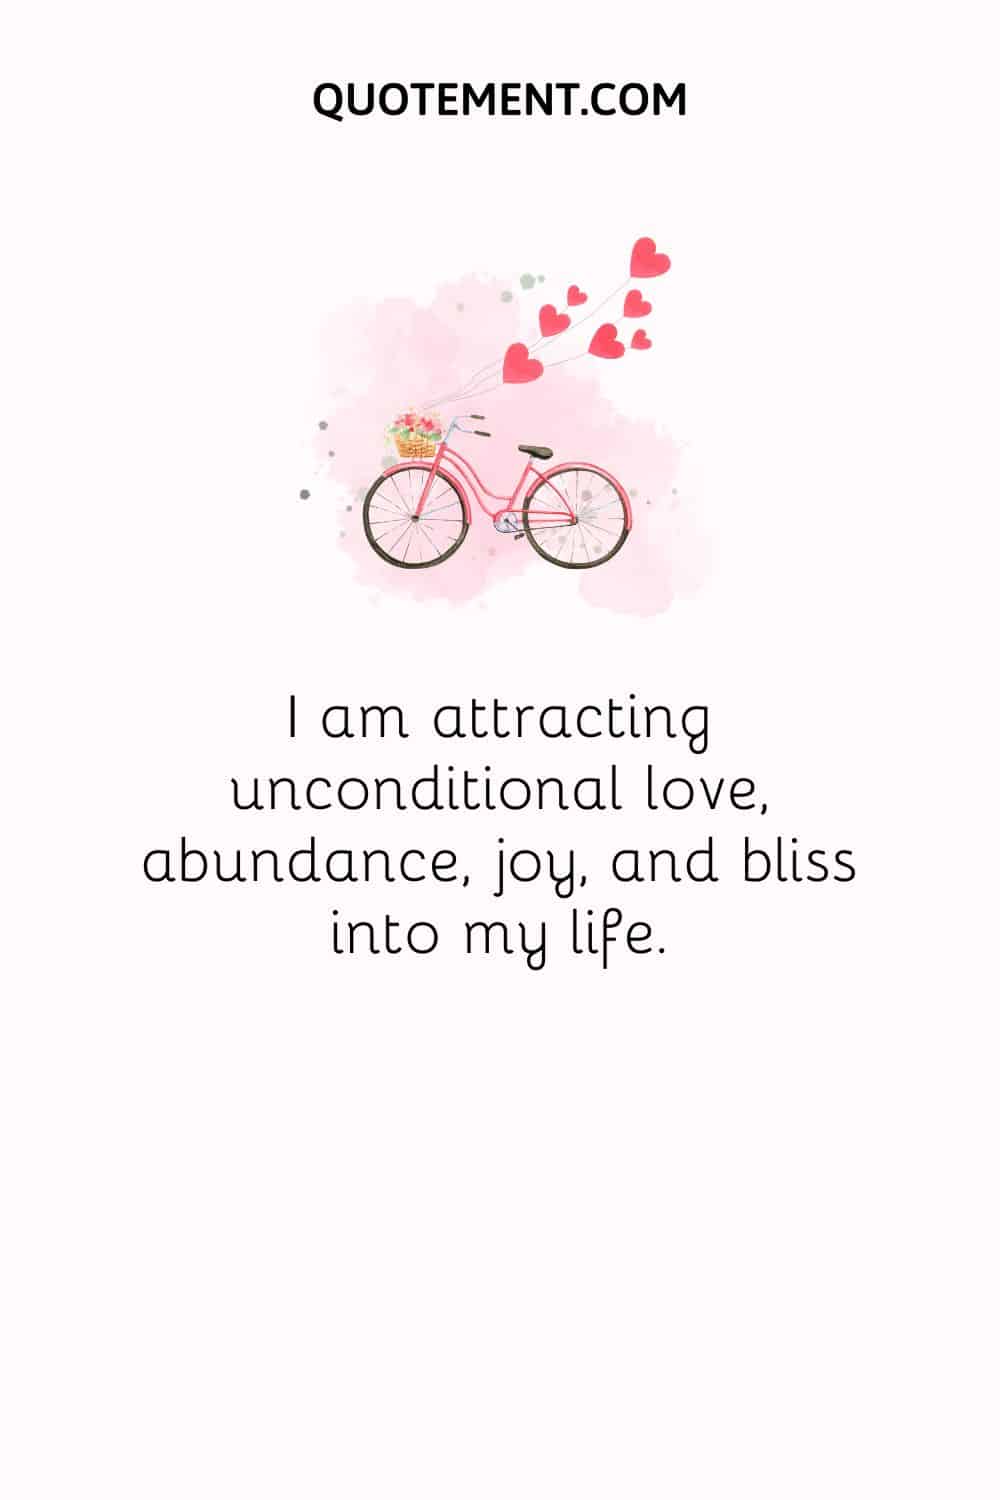 I am attracting unconditional love, abundance, joy, and bliss into my life